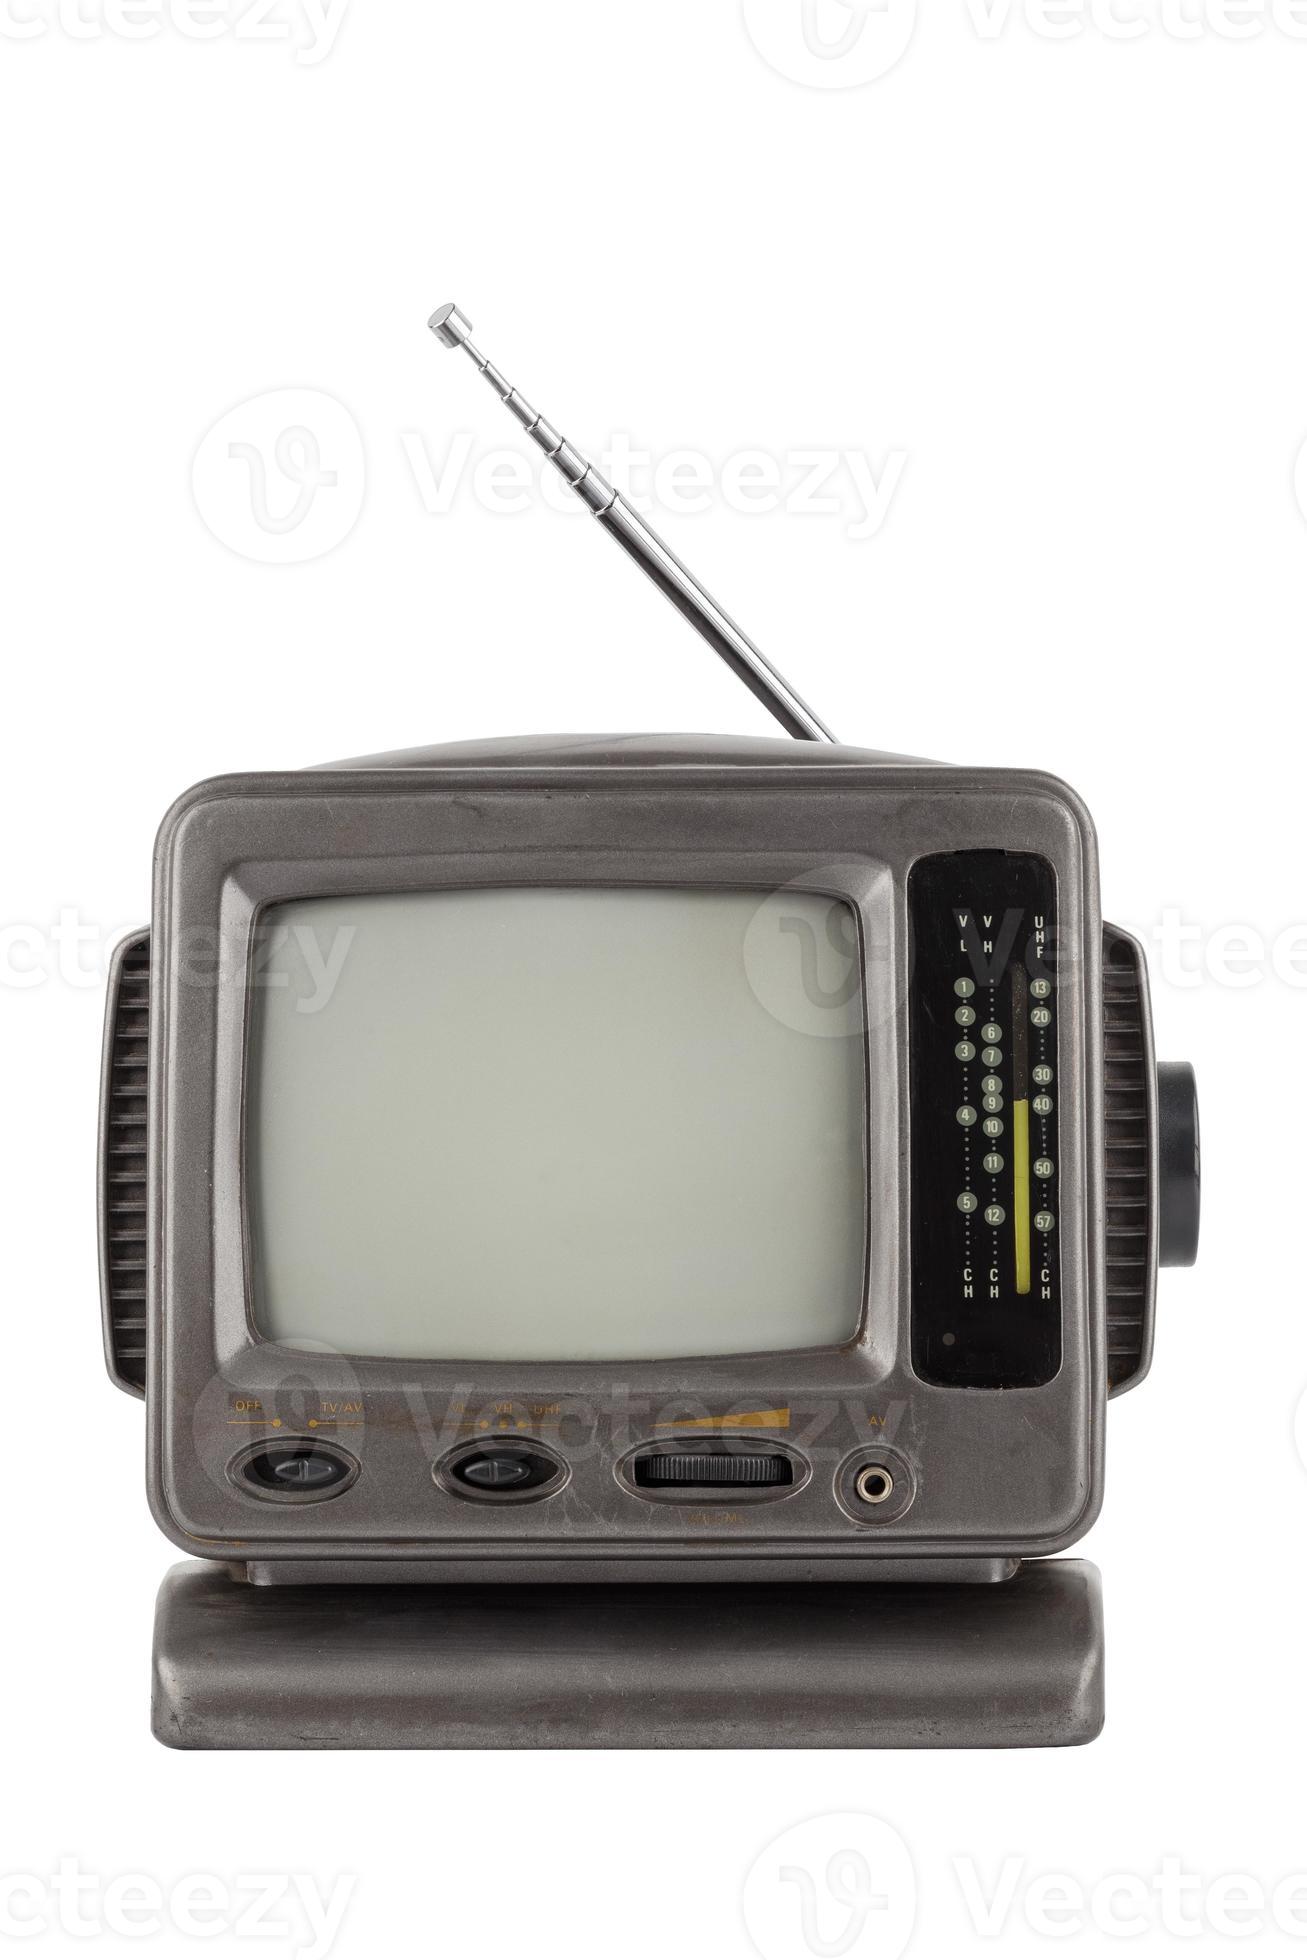 old-5-5-inch-protable-analog-crt-tv-unit-isolated-on-white-front-view-photo.jpg